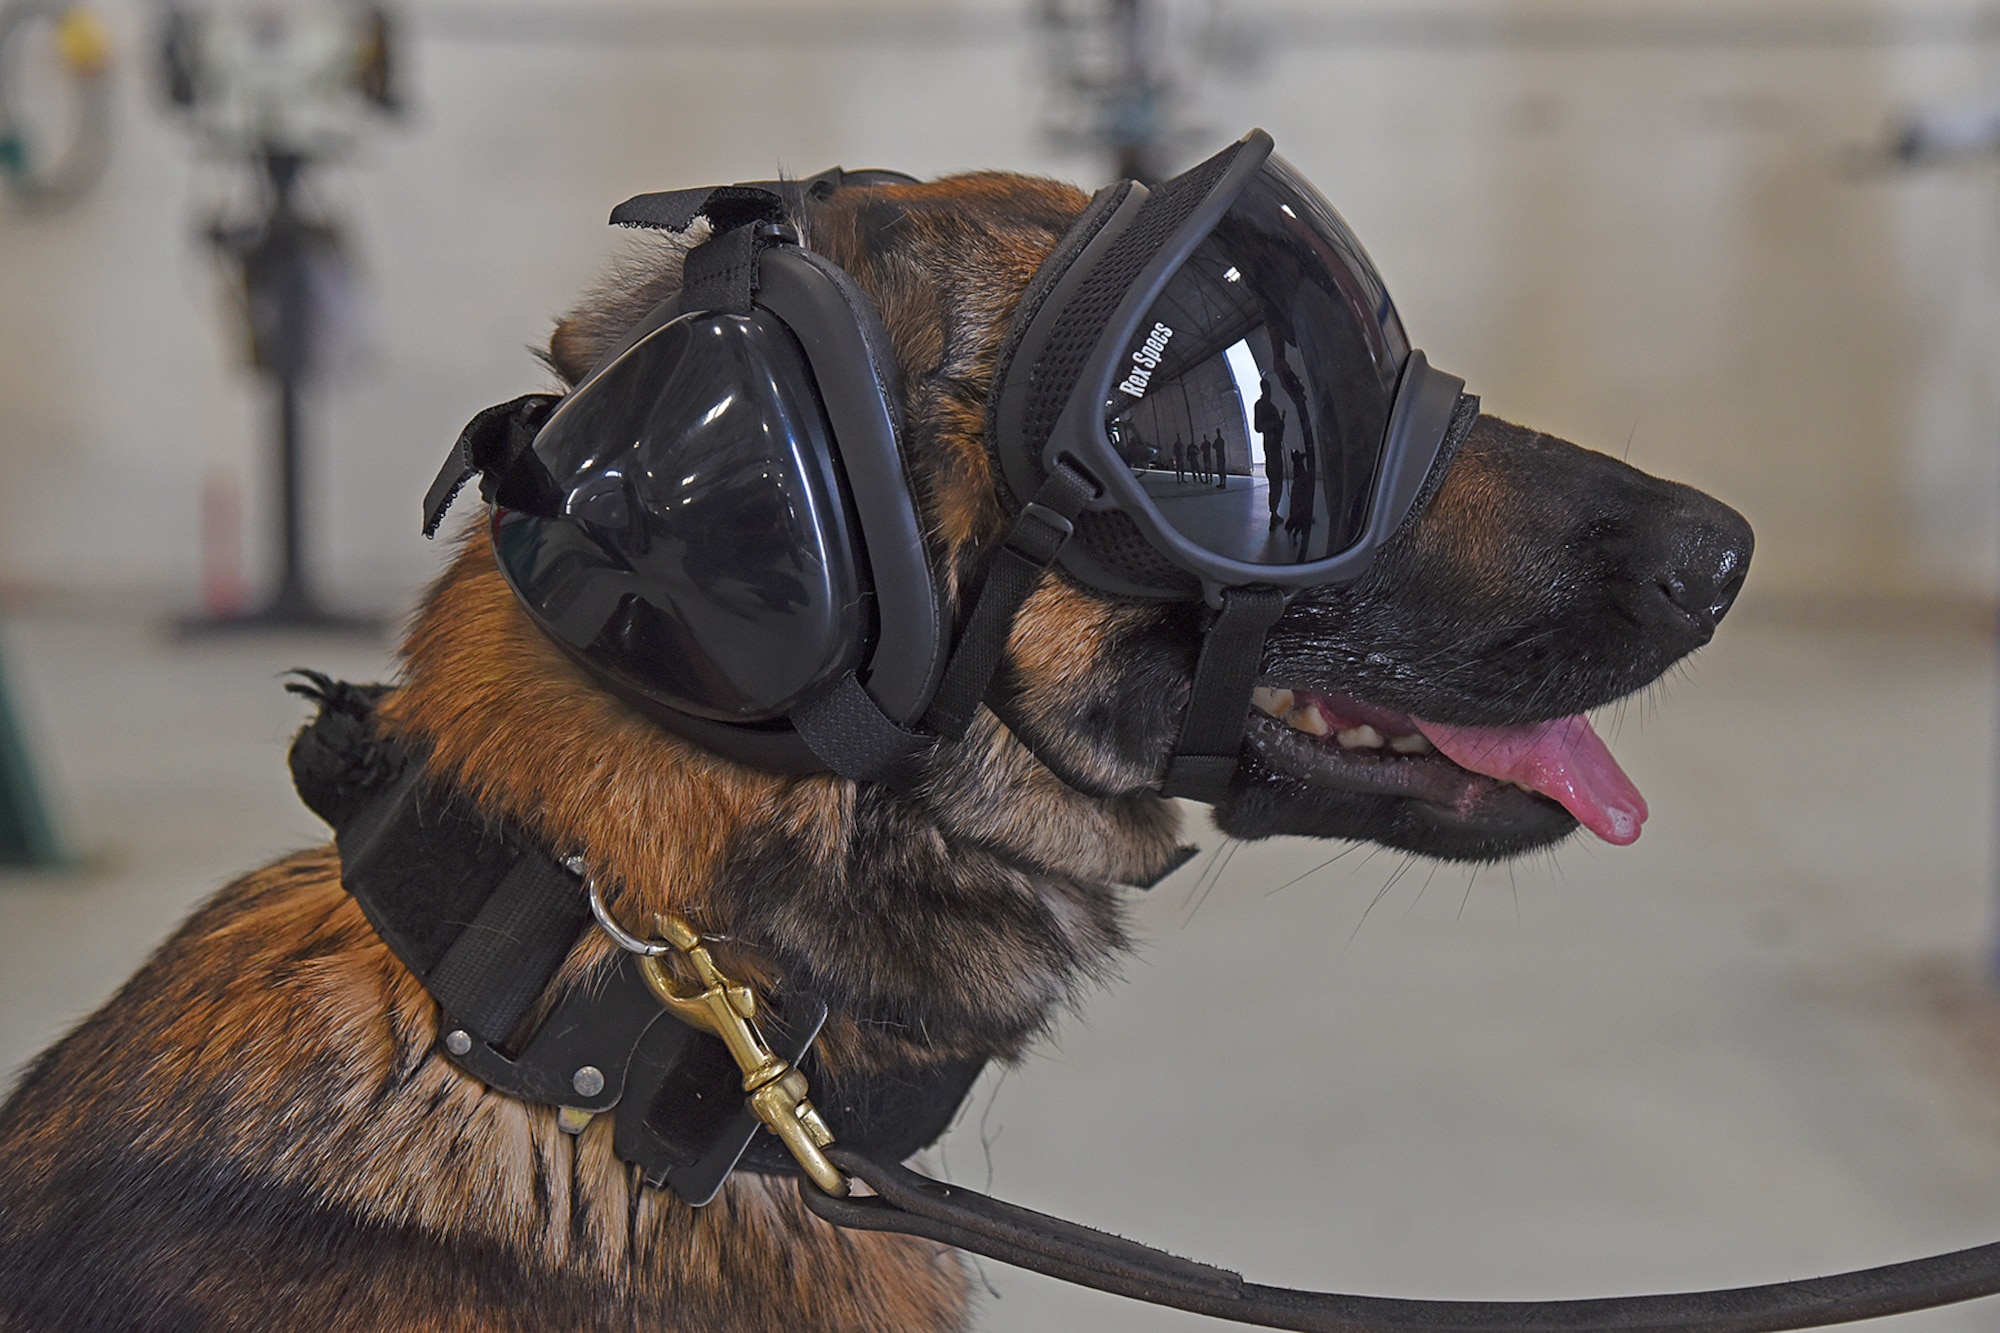 Military Working Dog Fanni patiently sits waiting for her handler during training July, 31, 2018, at Fairchild Air Force Base, Washington. The 92nd Security Forces Squadron MWD section partnered with the 36th Rescue Squadron to familiarize themselves and their dogs with helicopter operations in preparation for deployment missions. (U.S. Air Force photo/Staff Sgt. Mackenzie Mendez)